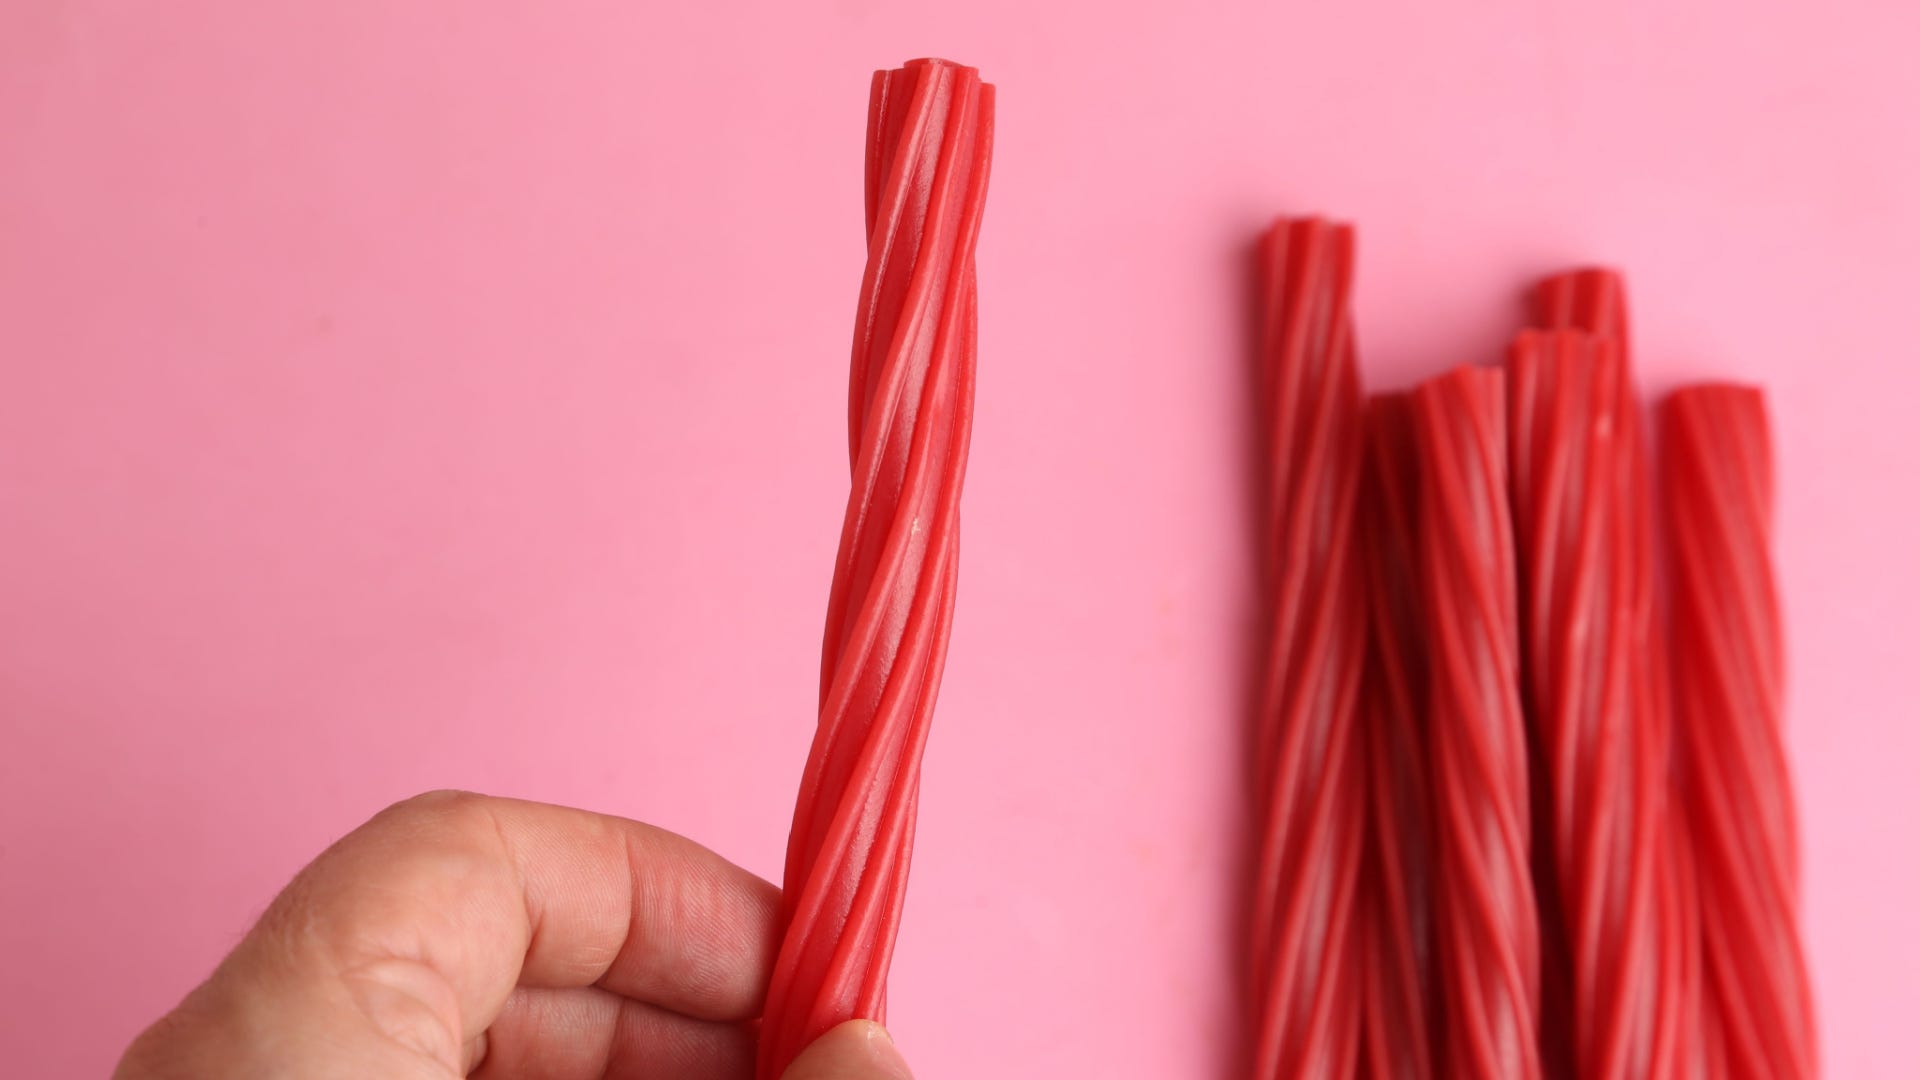 What’s the Difference Between Red Vines and Twizzlers?